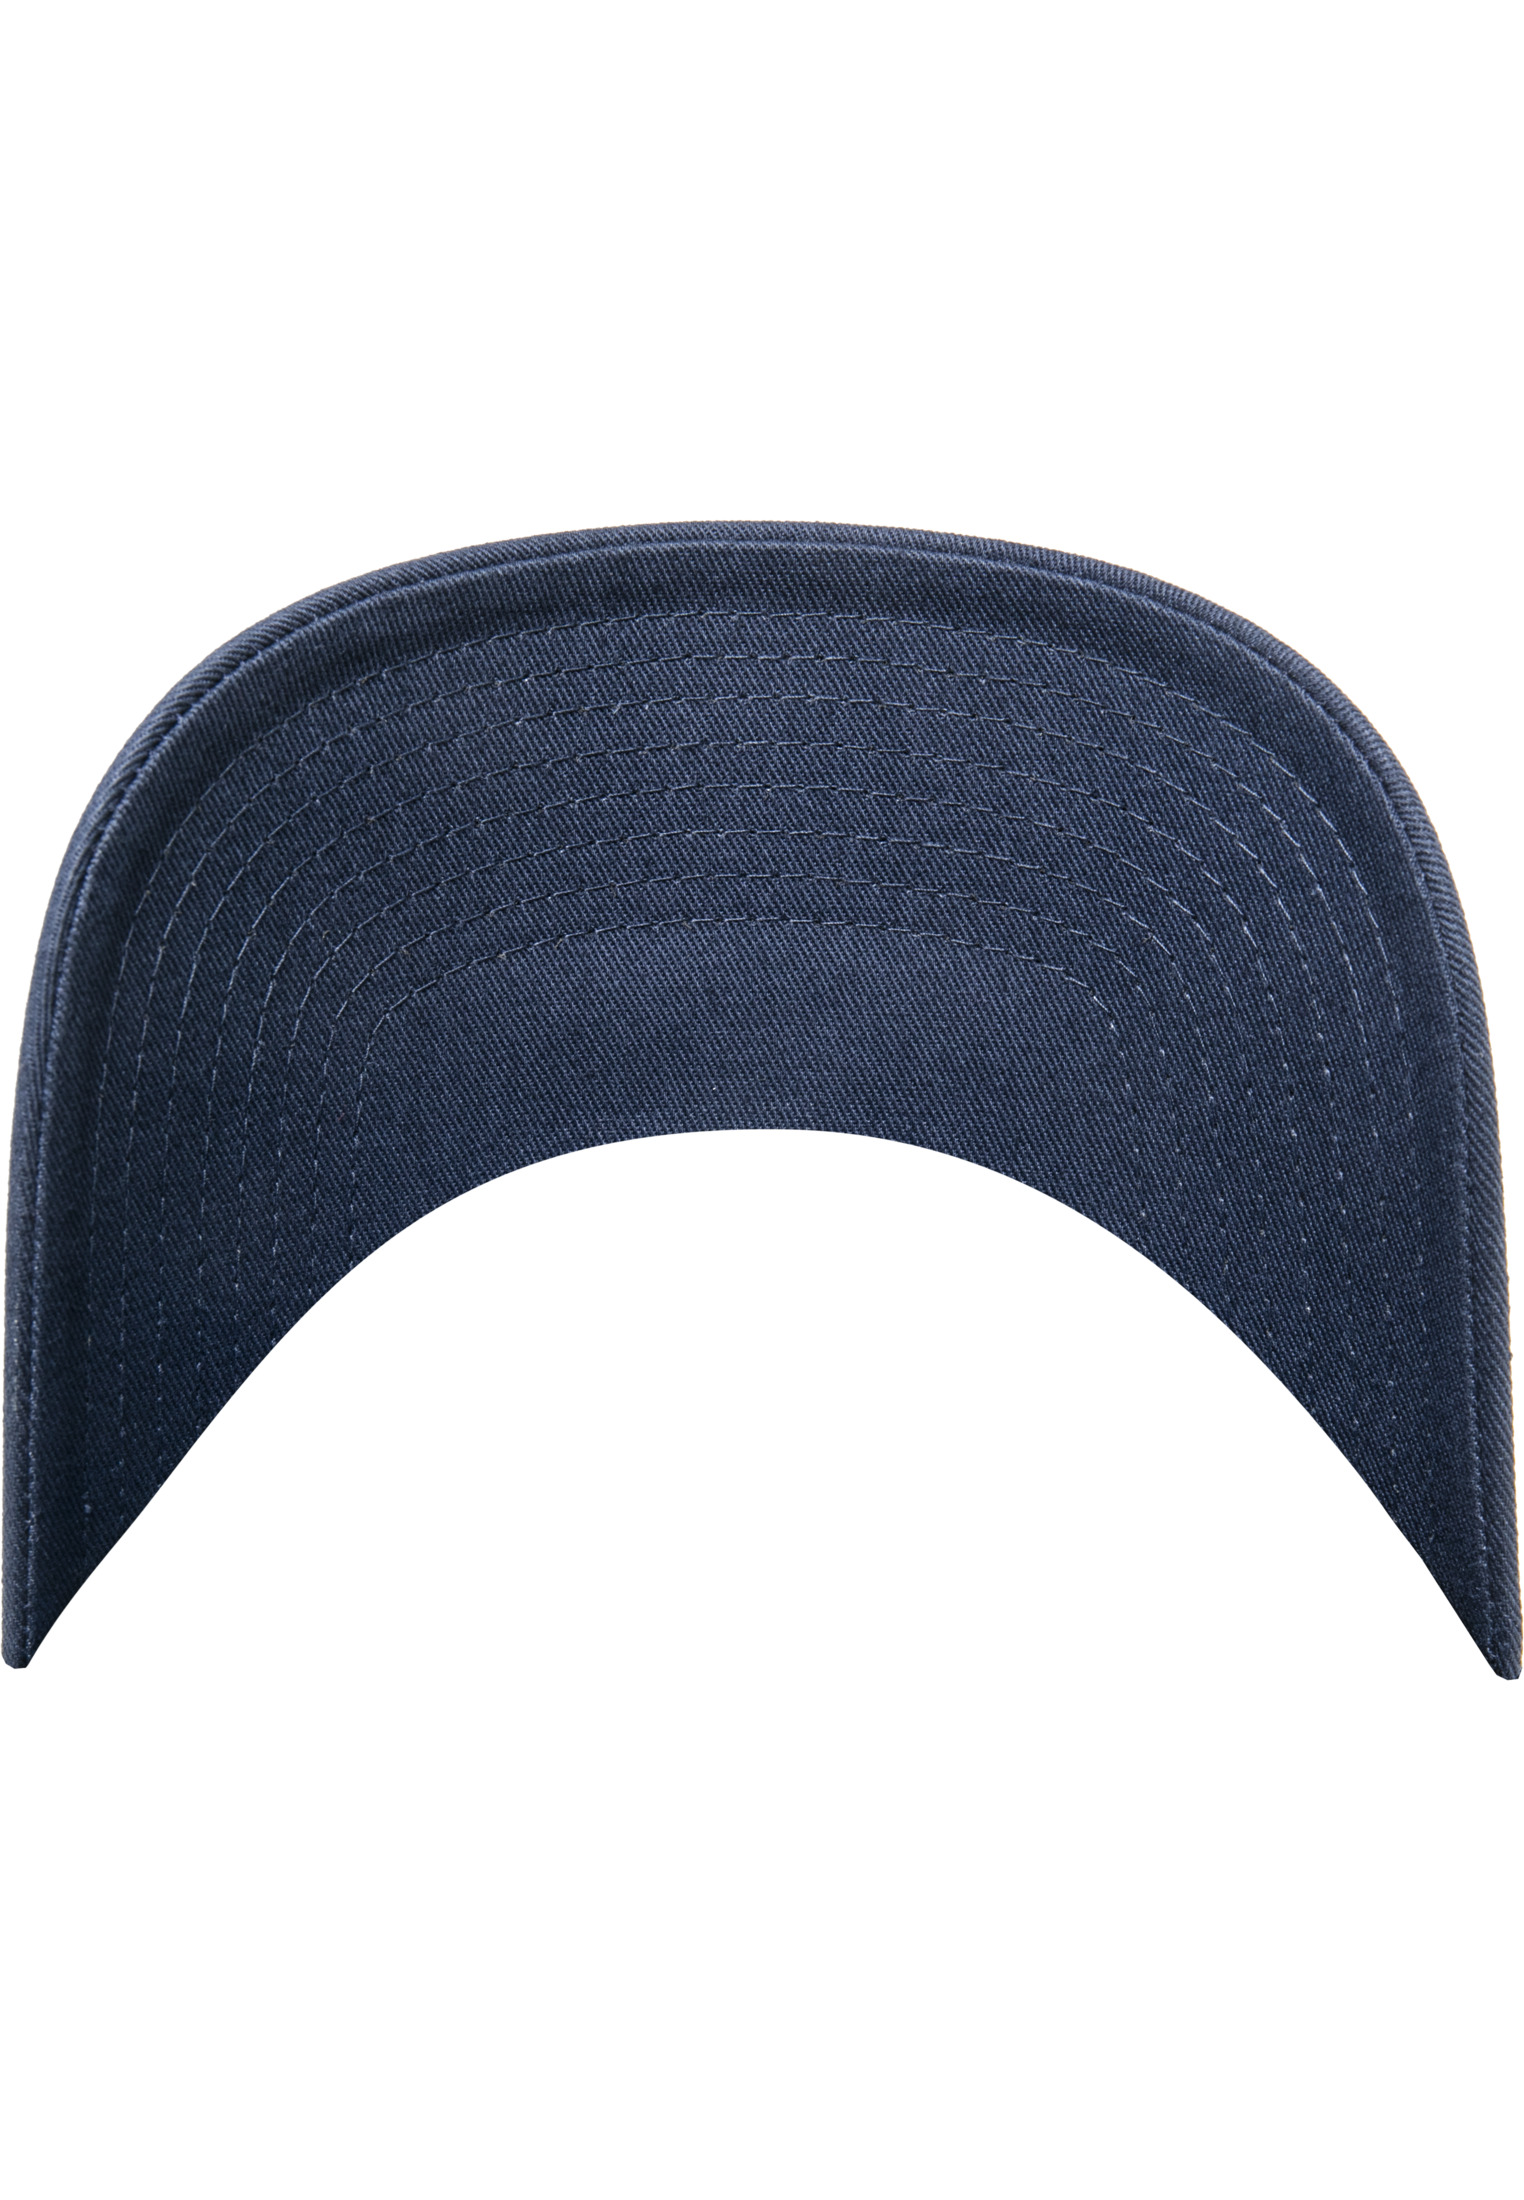 Snapback 5-Panel Curved Classic Snapback in Farbe navy